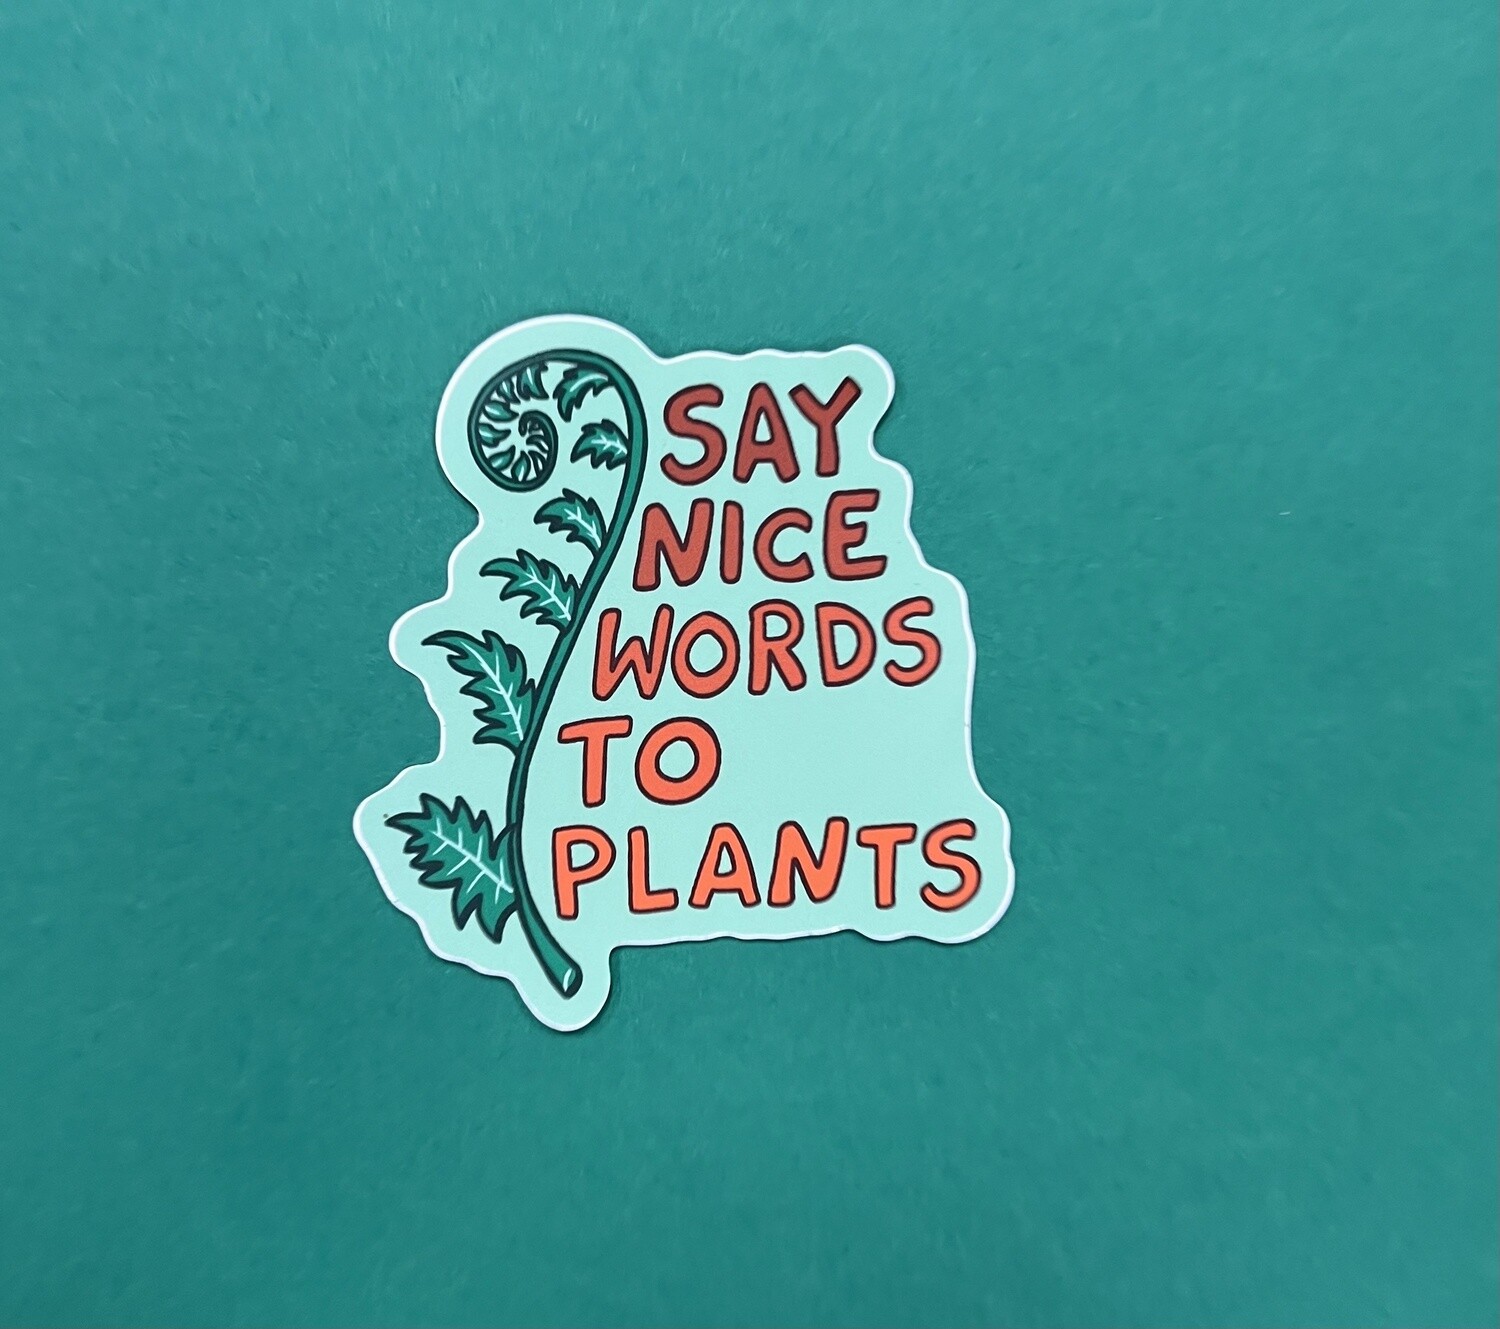 Say Nice Words to Plants - Sticker by Sarah Maloney